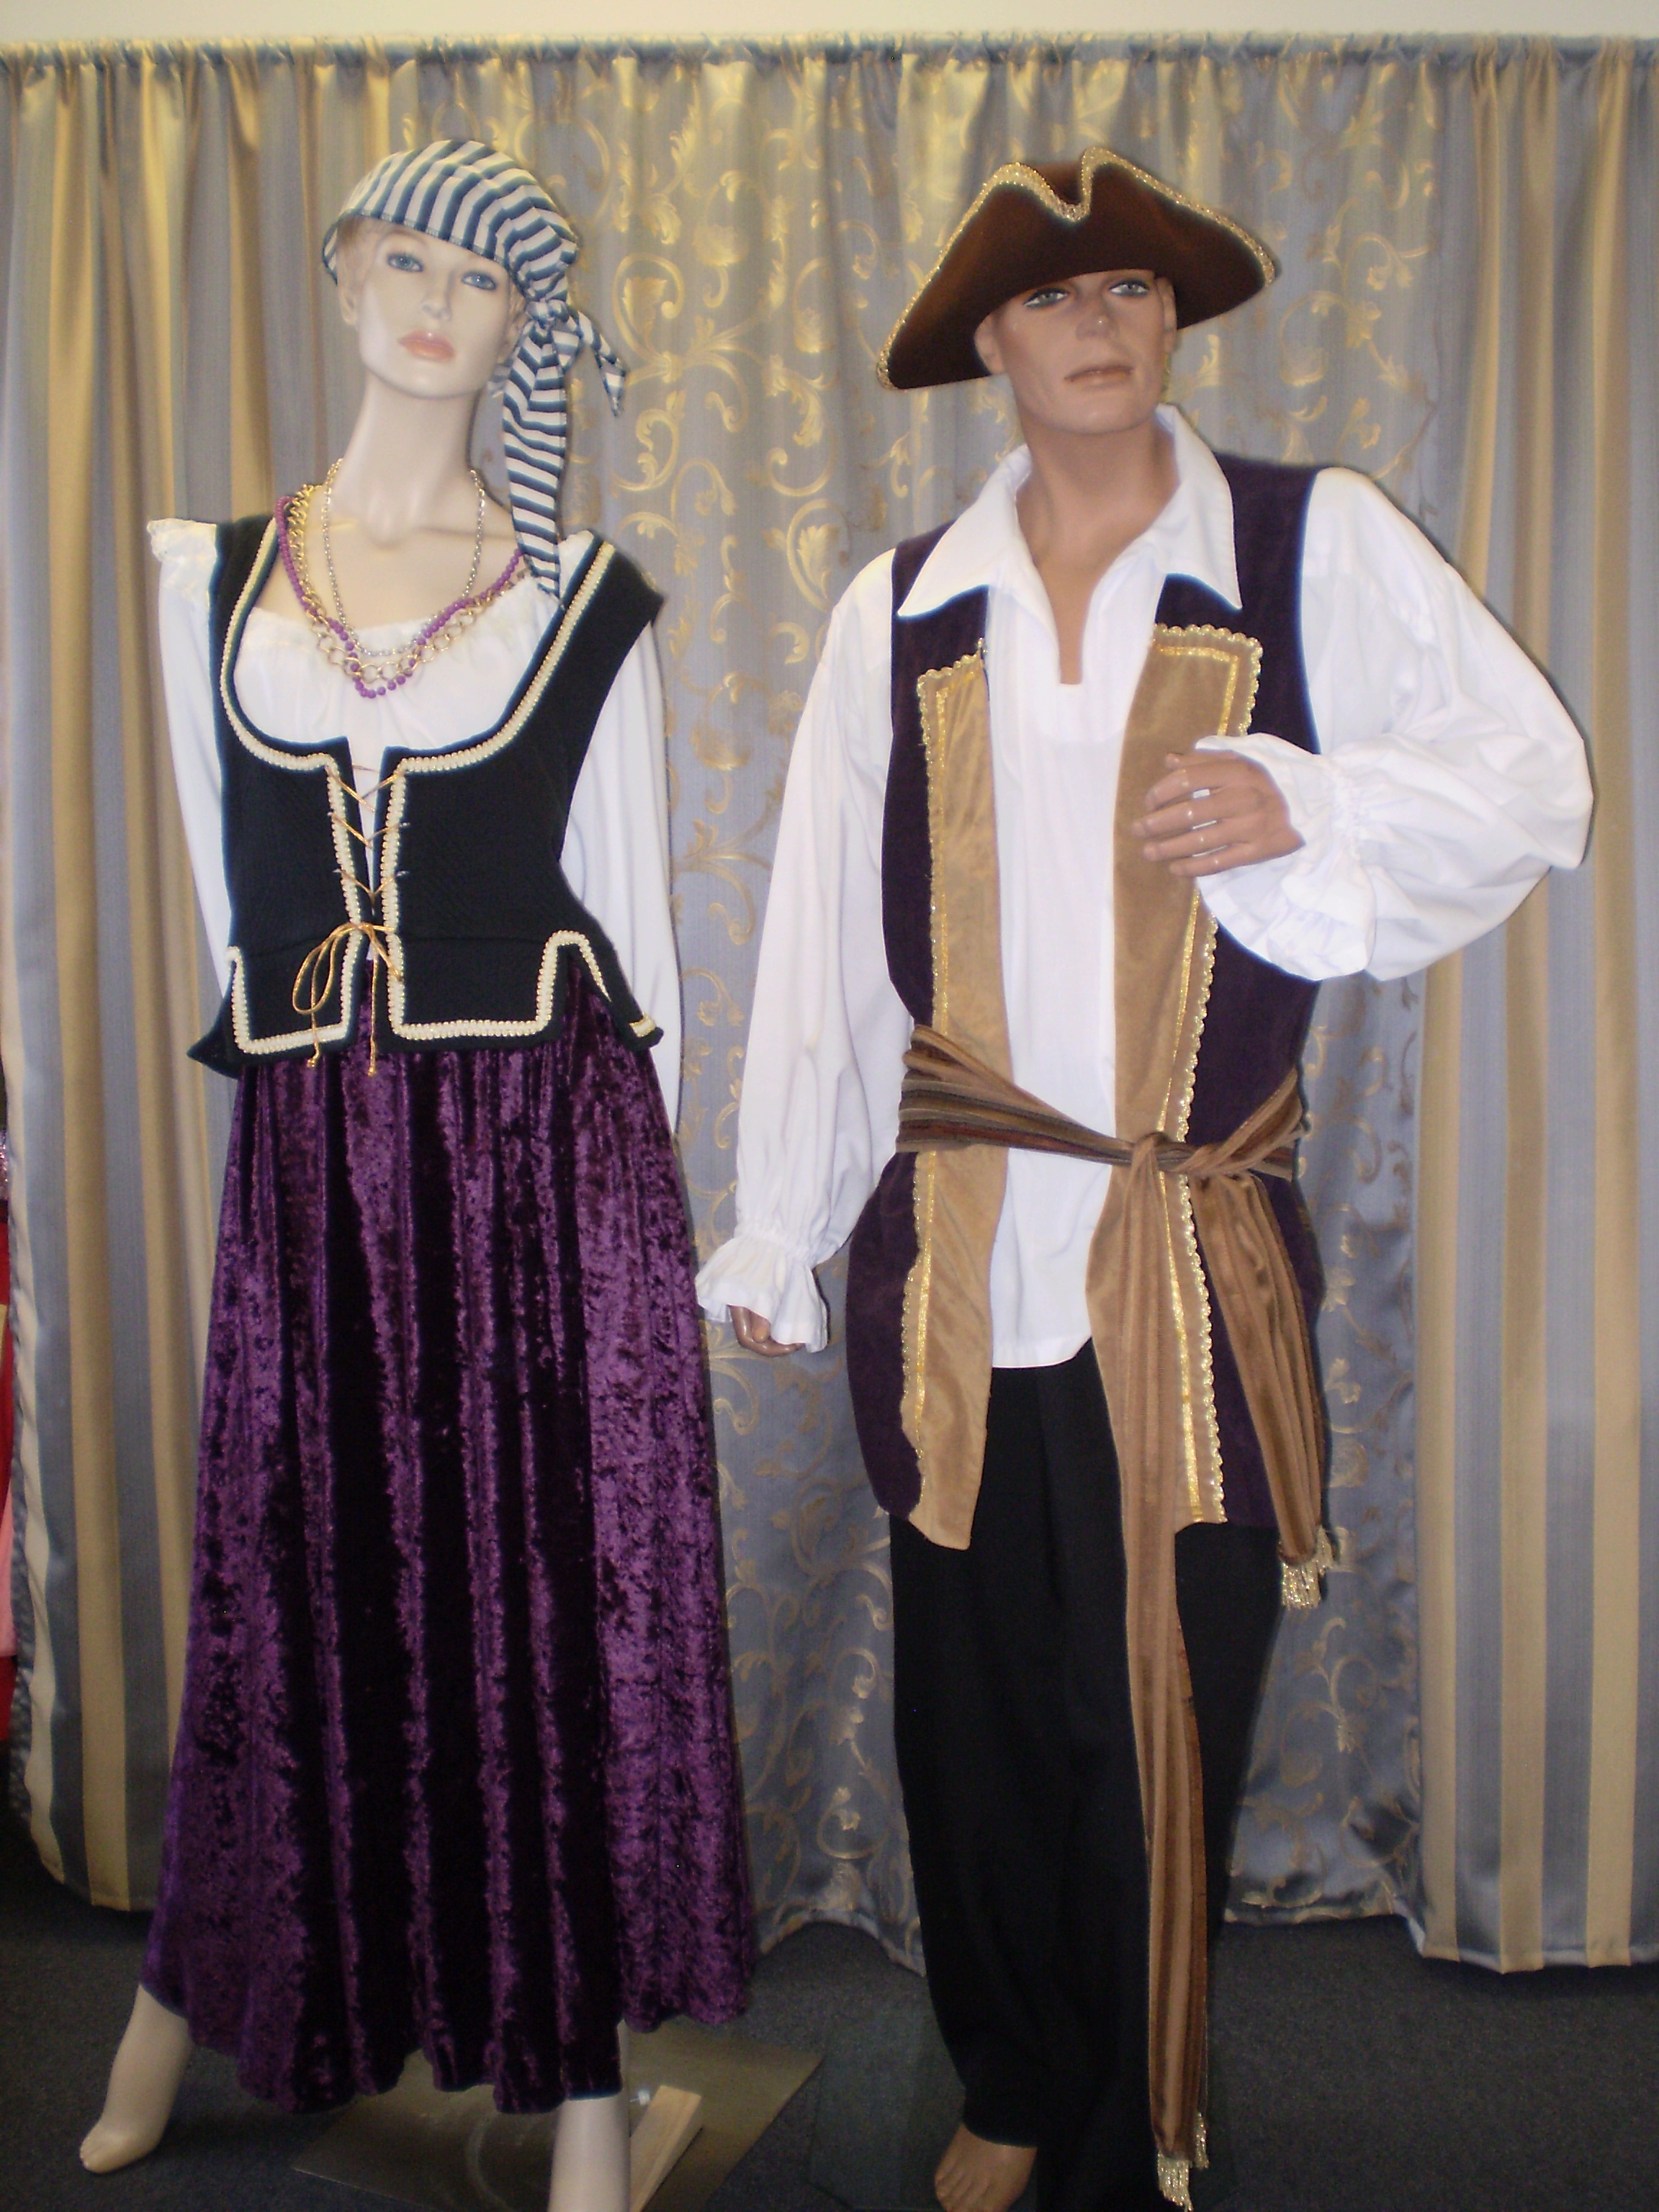 Pirate costumes, Pirate wenches, Pirate accessories. Hire or buy ...